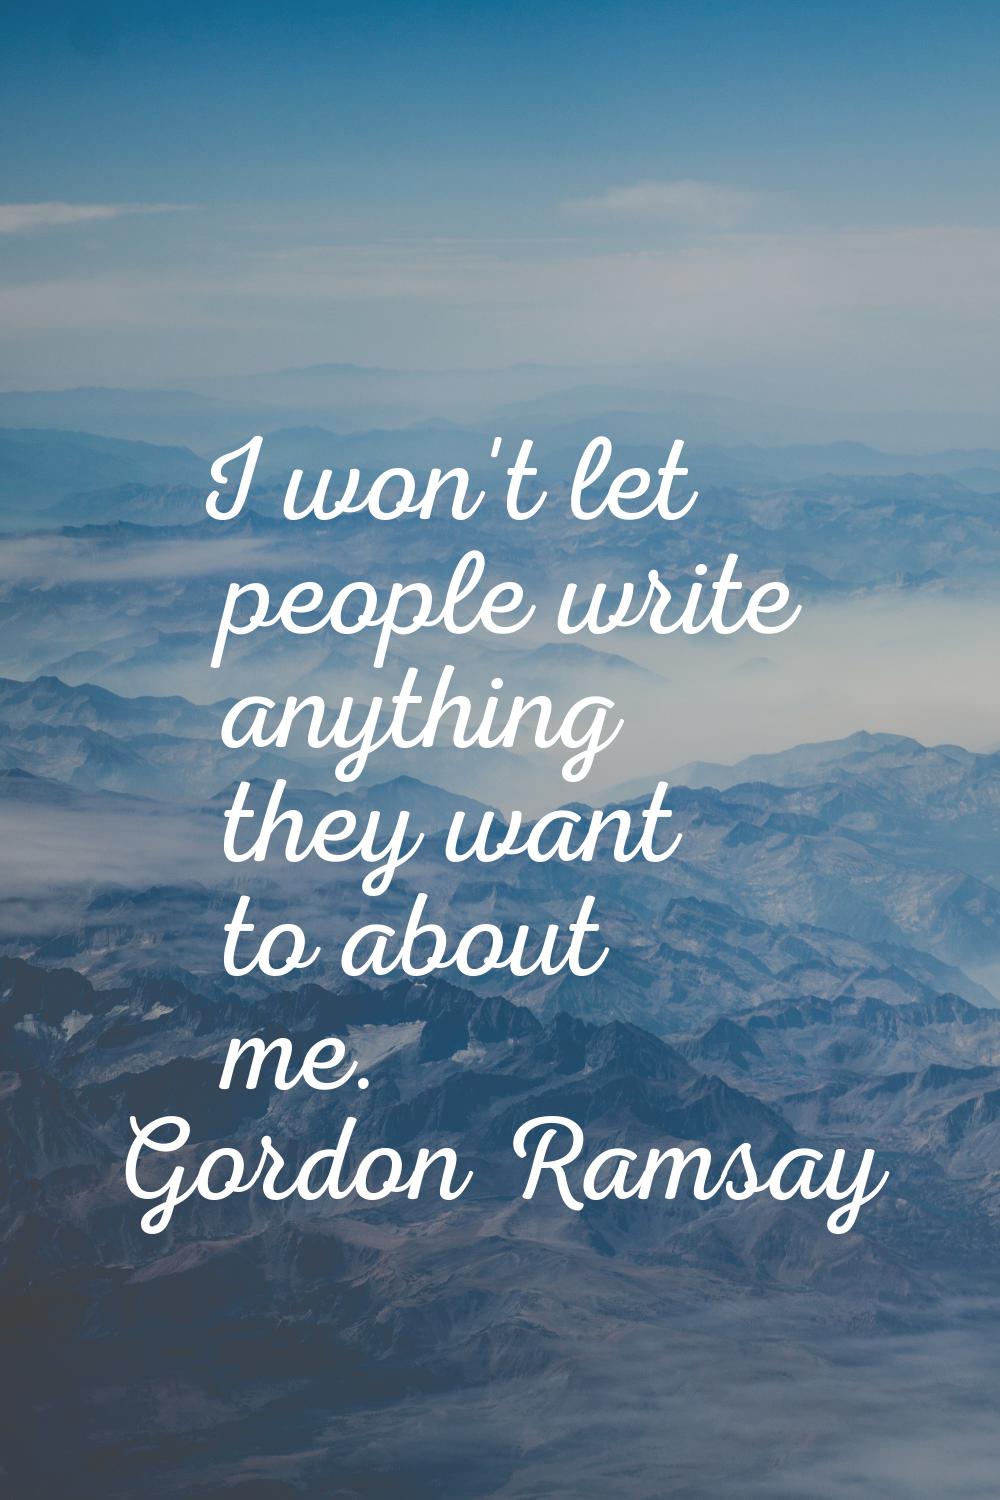 I won't let people write anything they want to about me.